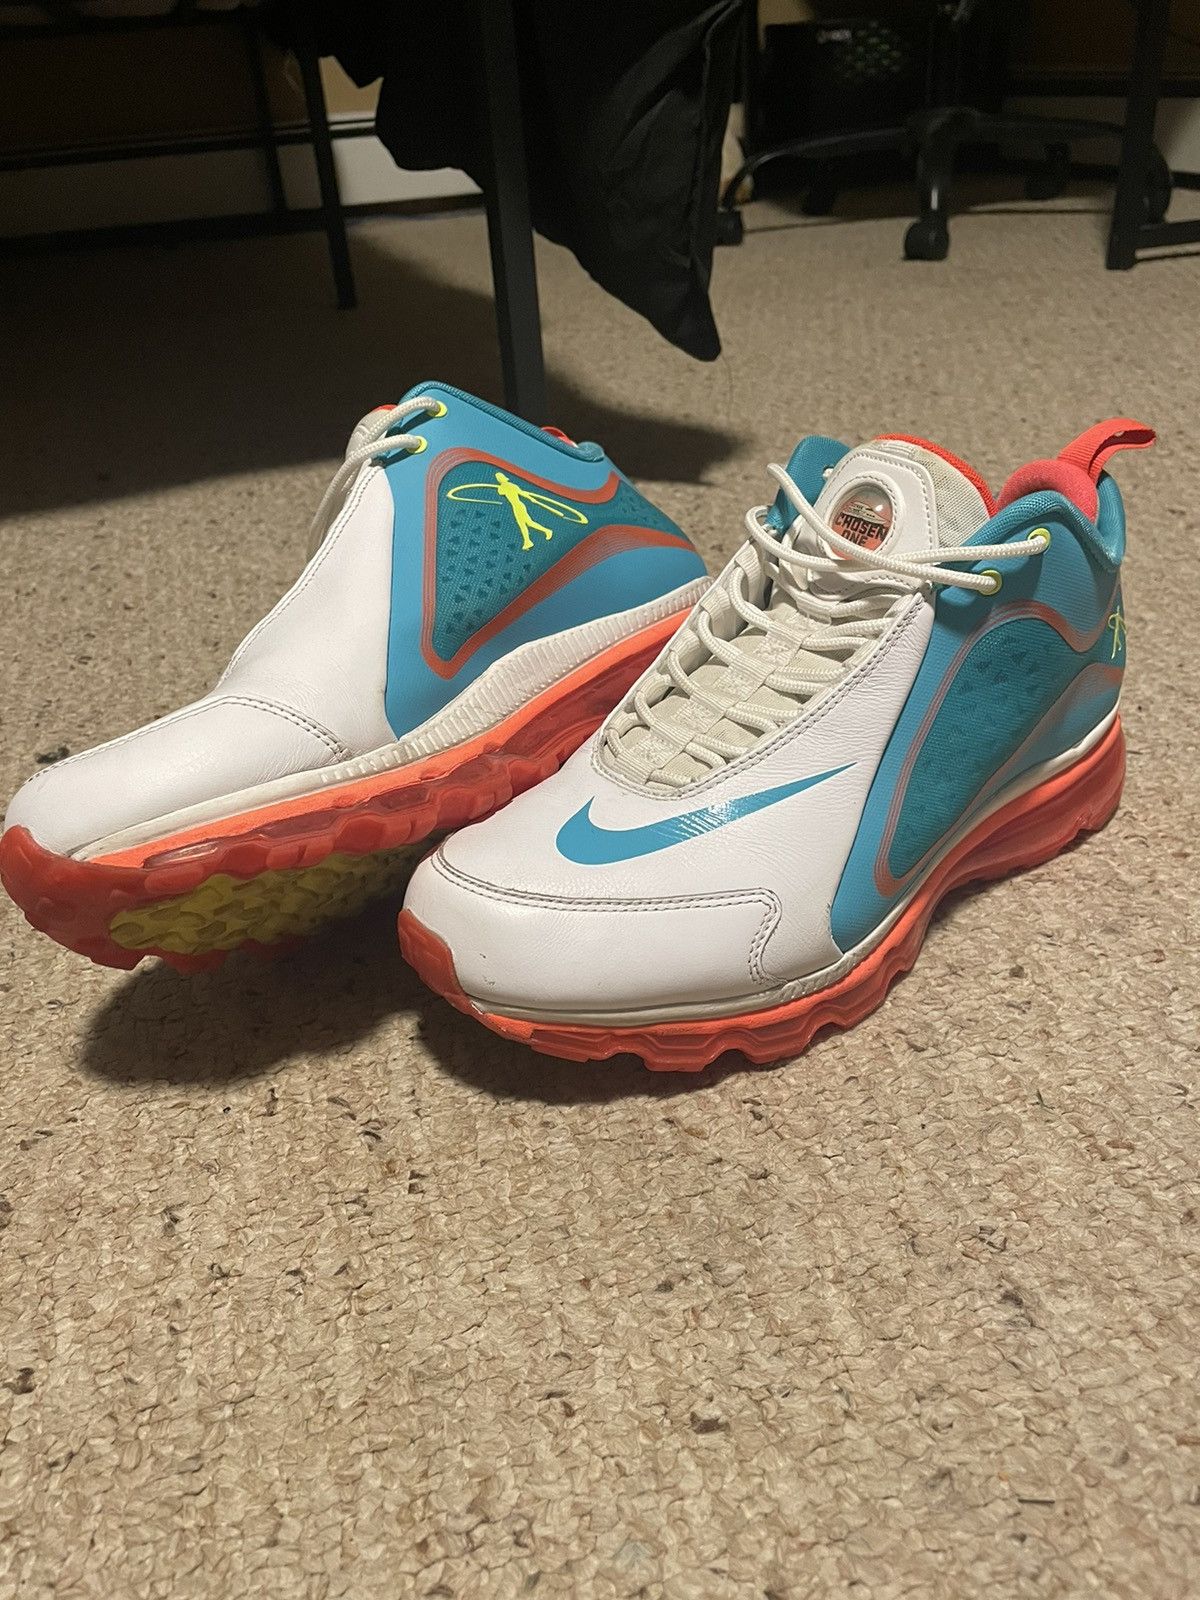 Size+8+-+Nike+Air+Griffey+Max+360+Burnt+Turquoise for sale online